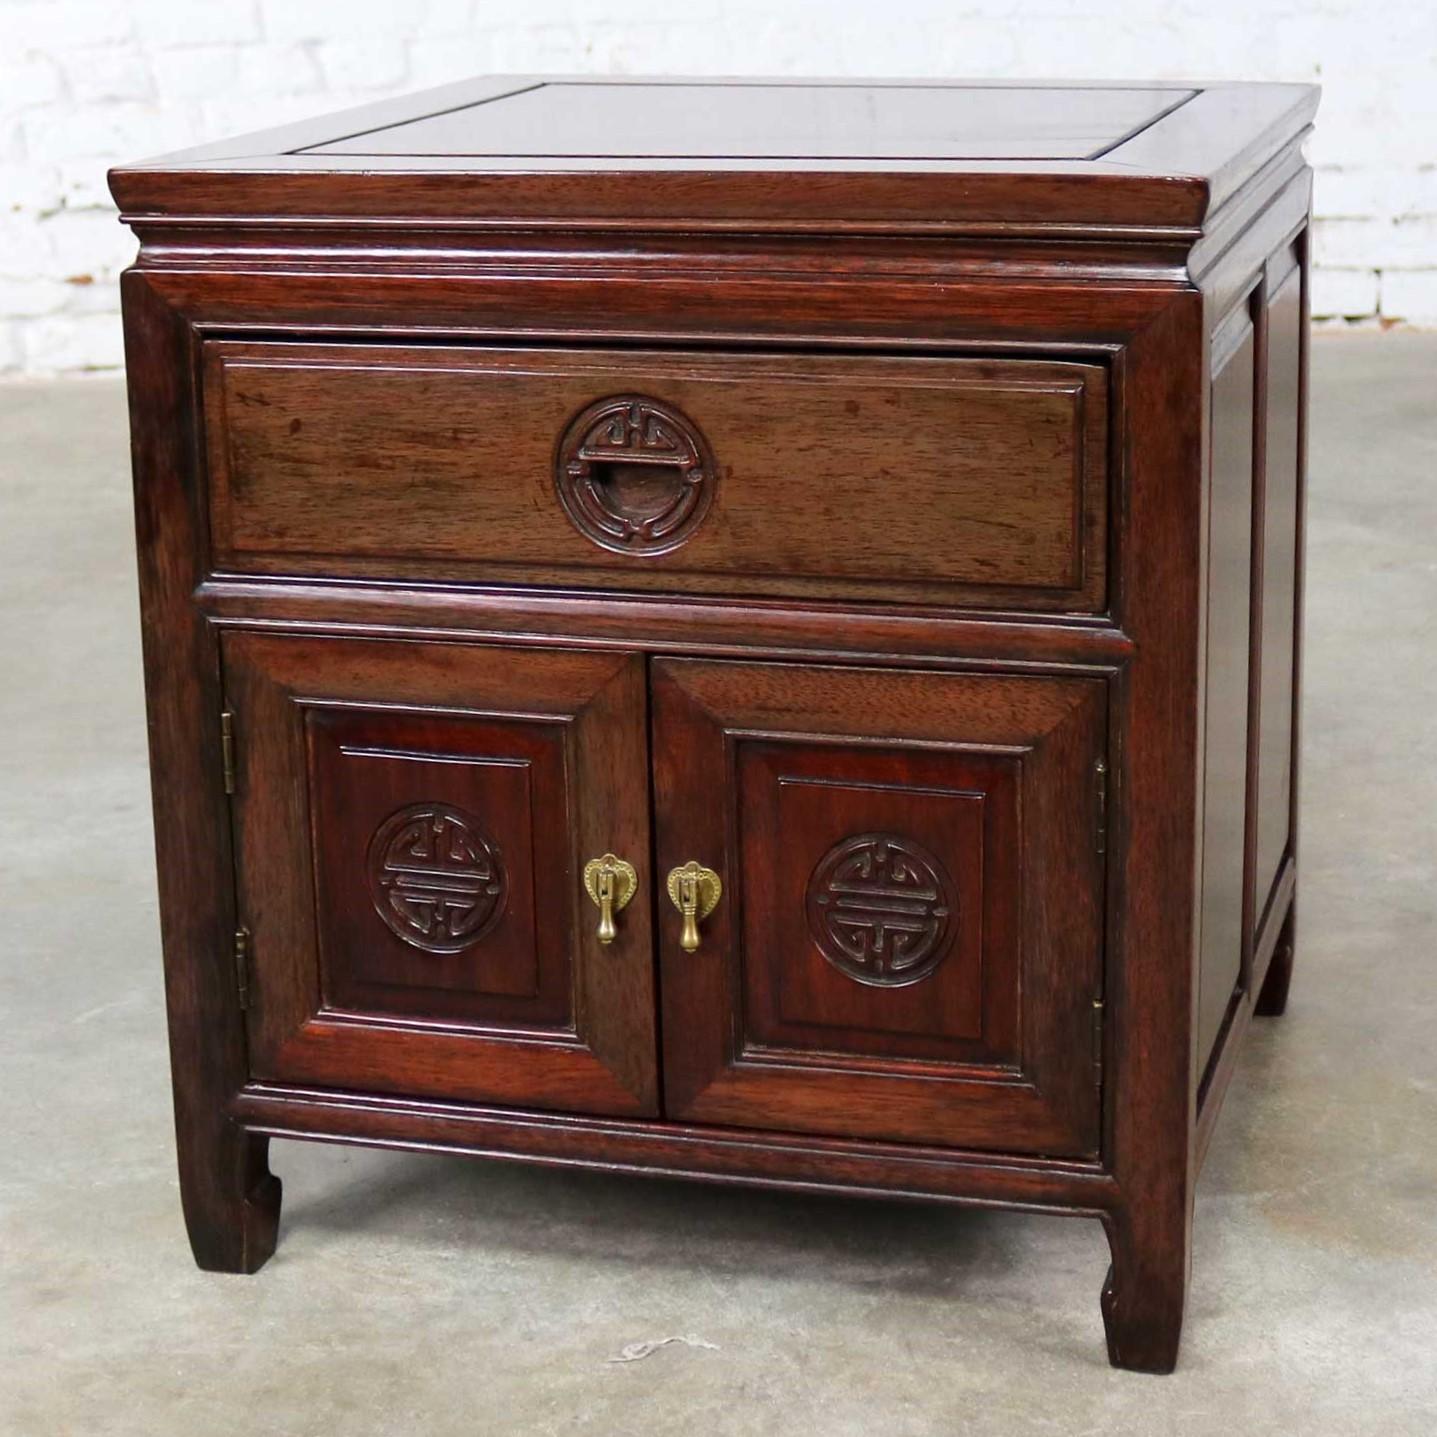 Handsome petite Asian rosewood square end table storage cabinet done in the style of George Zee of Hong Kong. It is in wonderful vintage condition with no outstanding flaws. Please see photos, circa late 20th century. 

When nothing else will